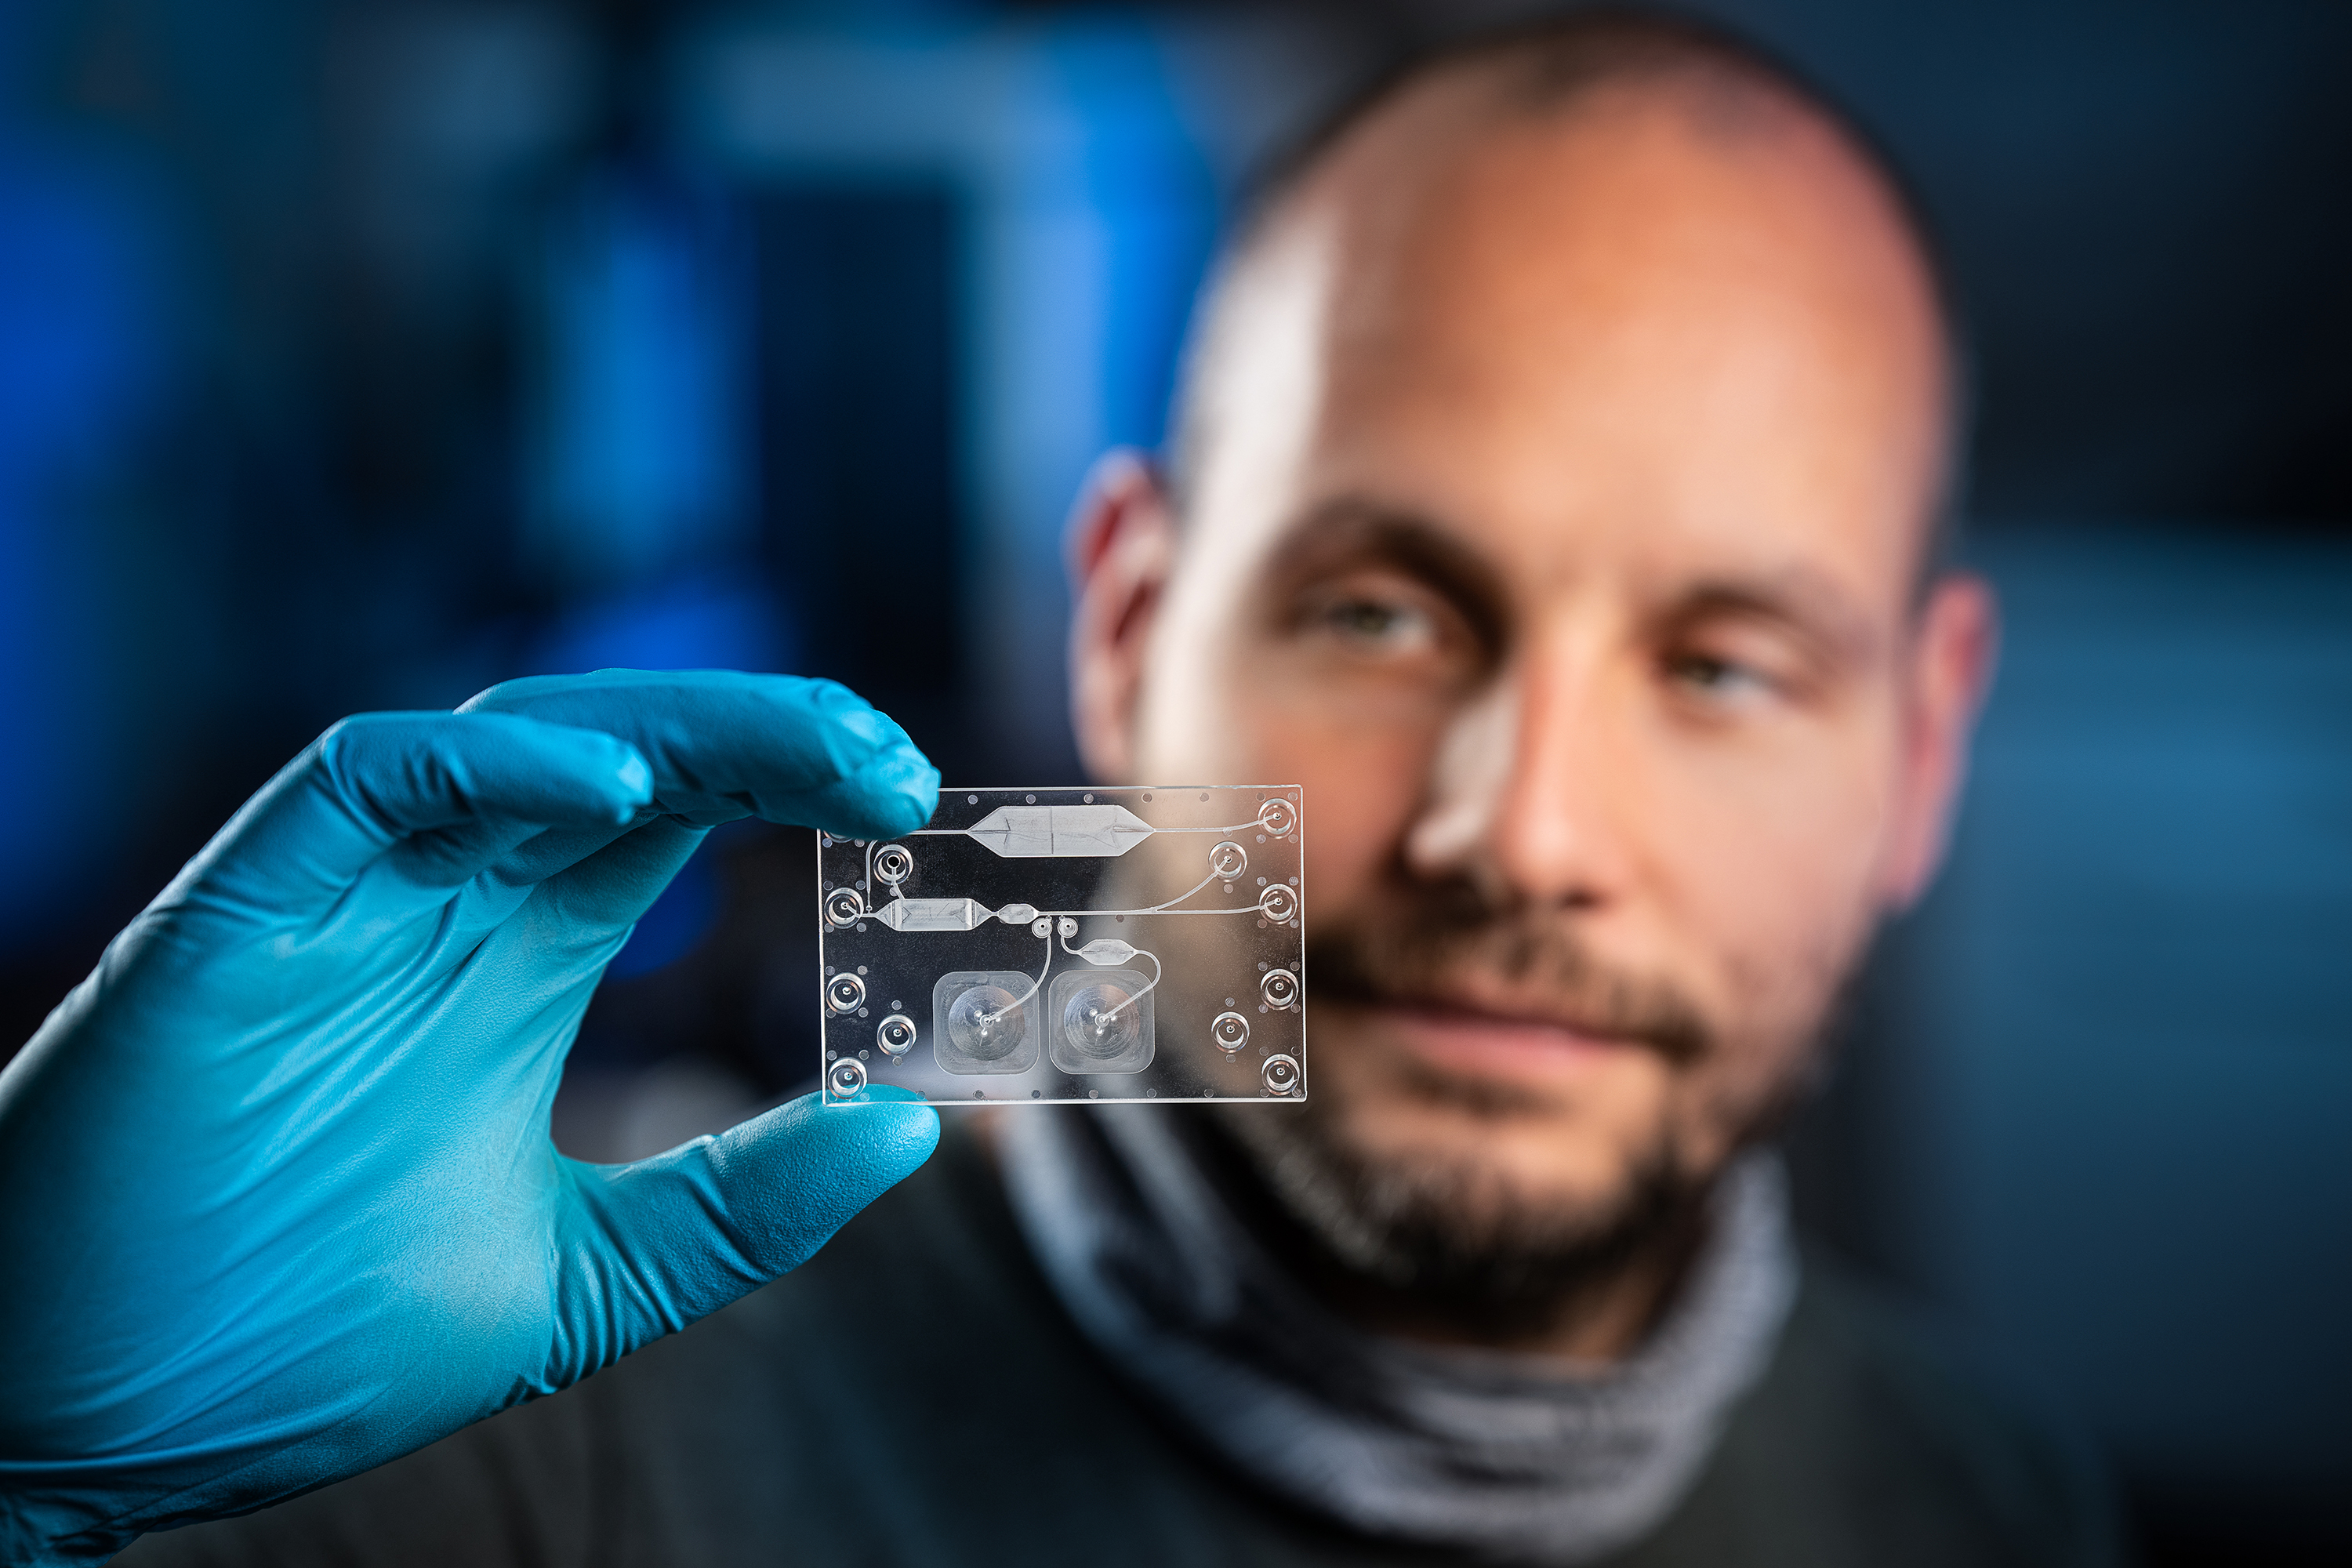 Florian Schmieder checks the prototype of a complex in vitro diagnostic cartridge for blood separation. Fraunhofer IWS is developing new methods for the cost-efficient production of such cartridges with industry partners in the SIMPLE-IVD project.